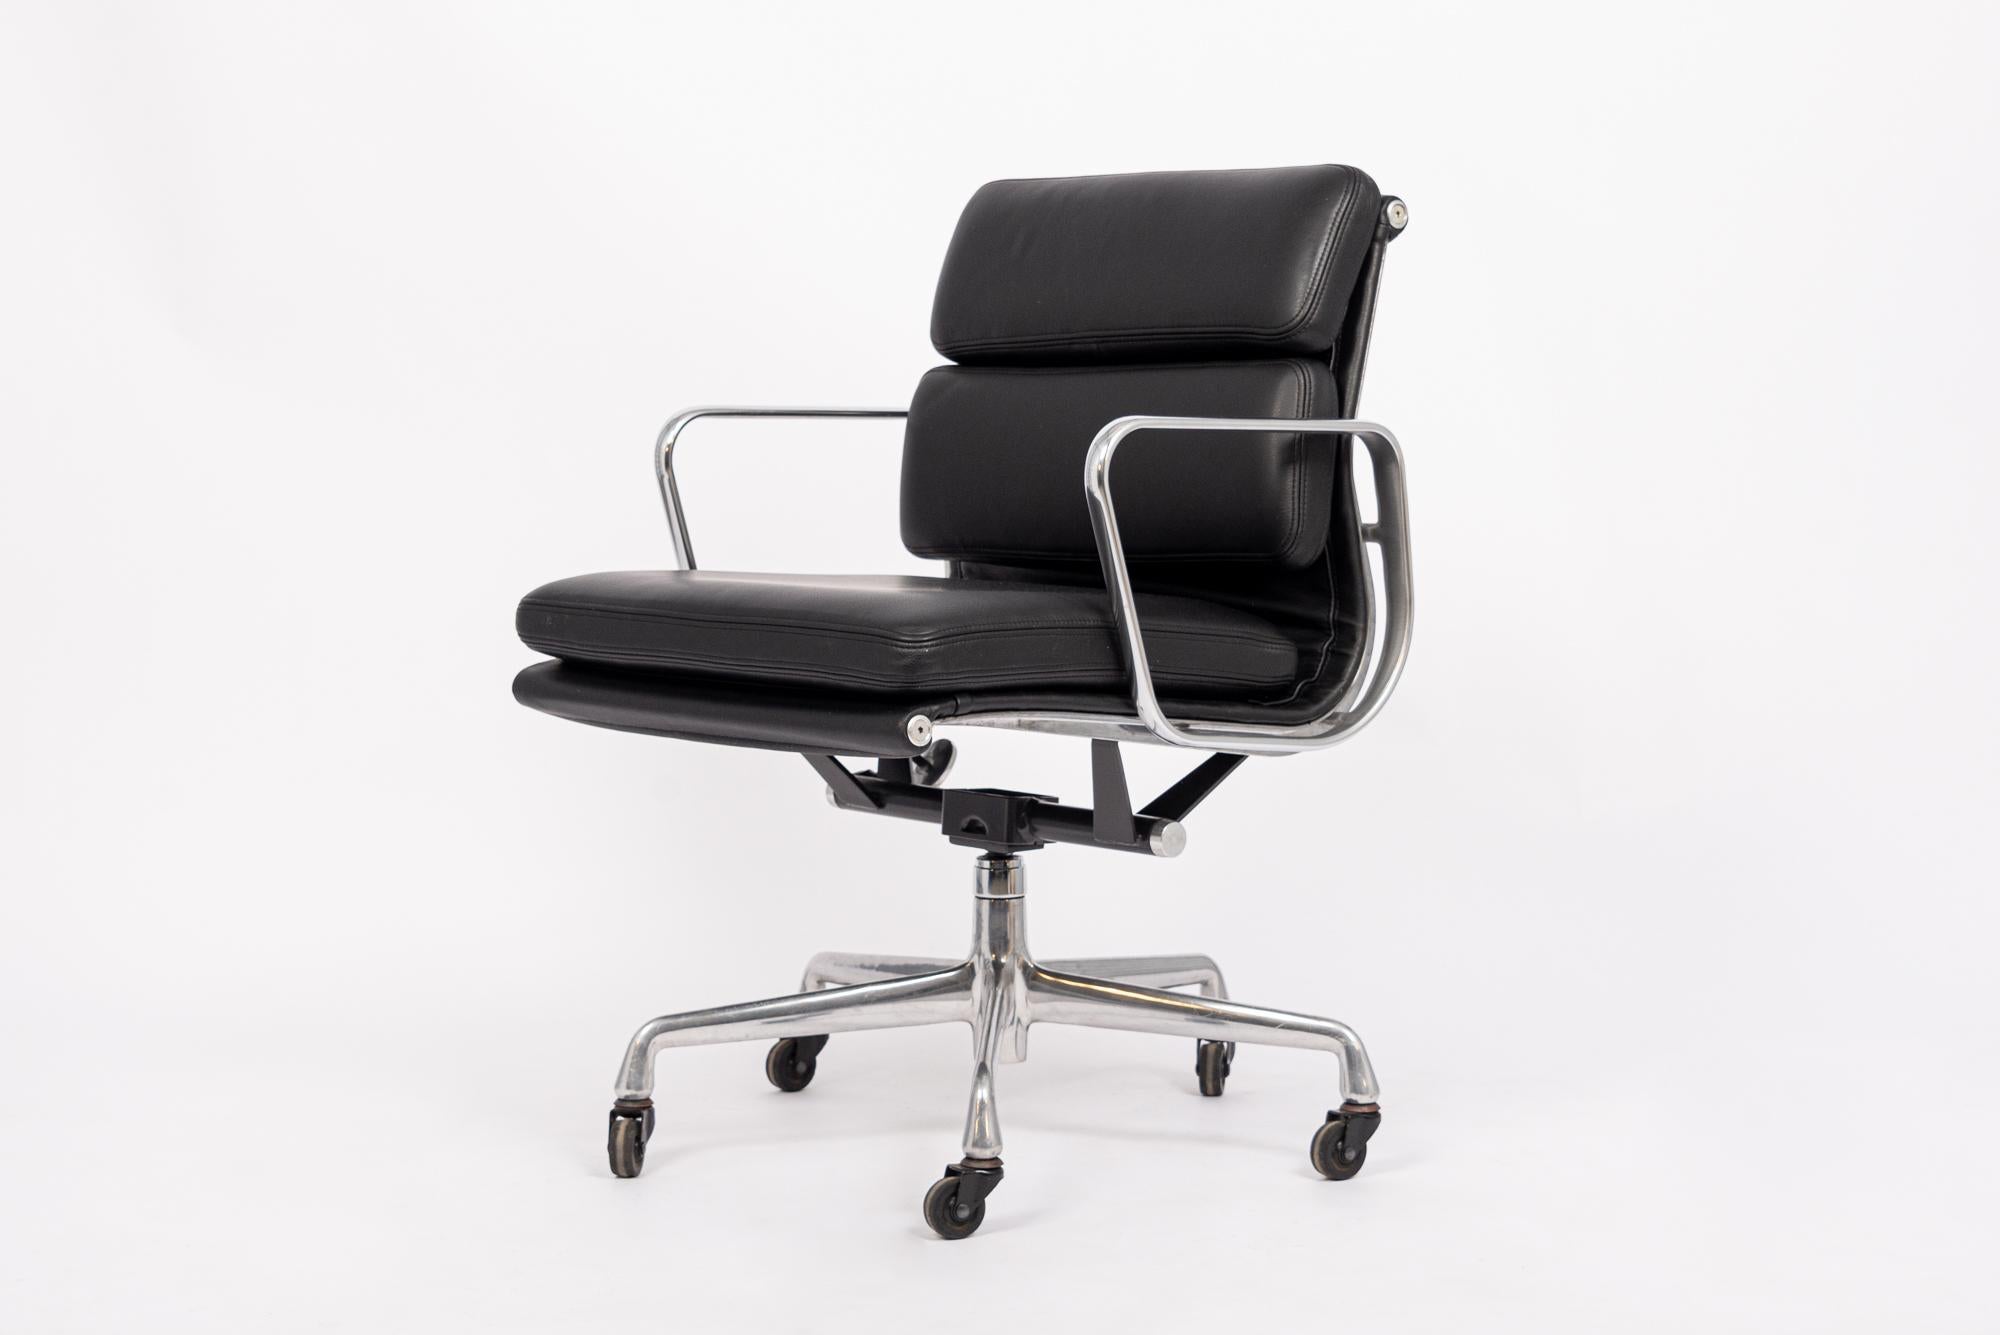 This authentic Eames for Herman Miller Soft Pad Management Height black leather office chair from the Aluminum Group Collection was manufactured in the 2000s. This classic mid century modern office chair was first introduced in 1969 by Charles and